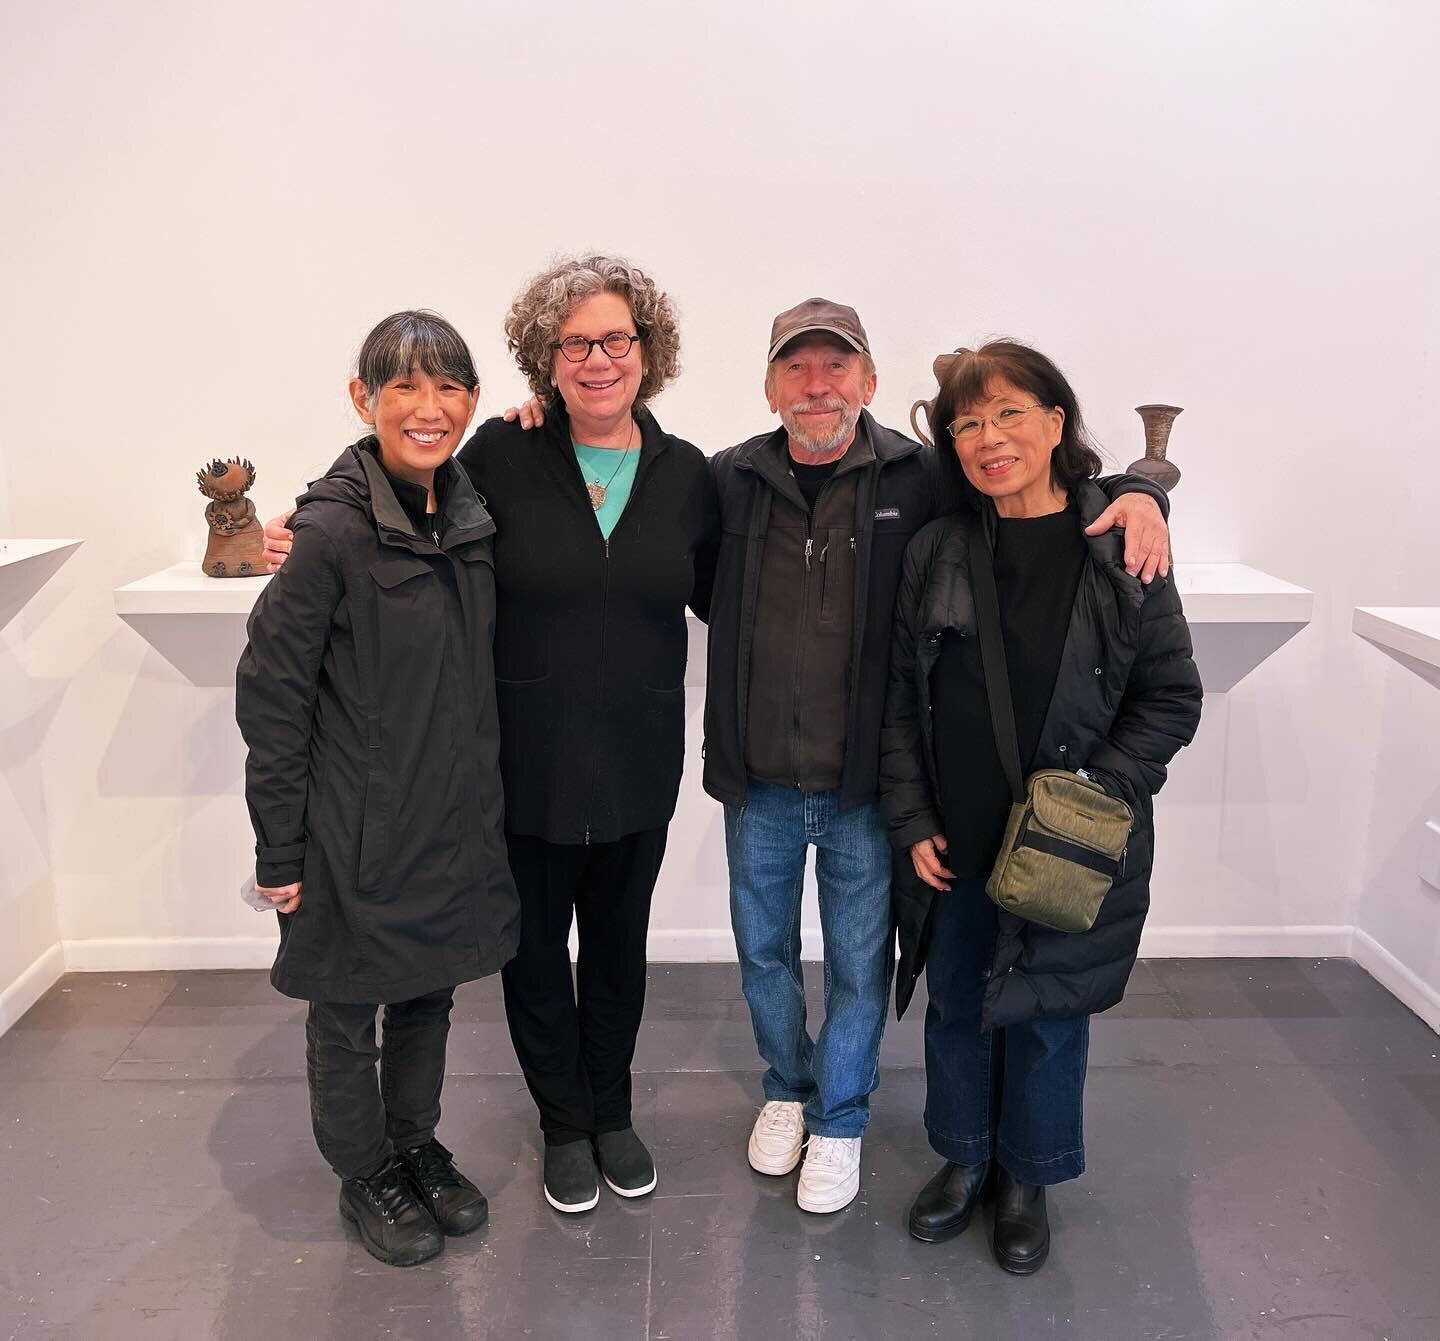 Thank you to my partners in crime, members of the wood fire cult for coming out to the artist talk today with Toru 💙and thanks to all  my friends who came also!! Thanks so much to @transmissiongallery for hosting! #strangelyfamiliar #woodfiredsculpt